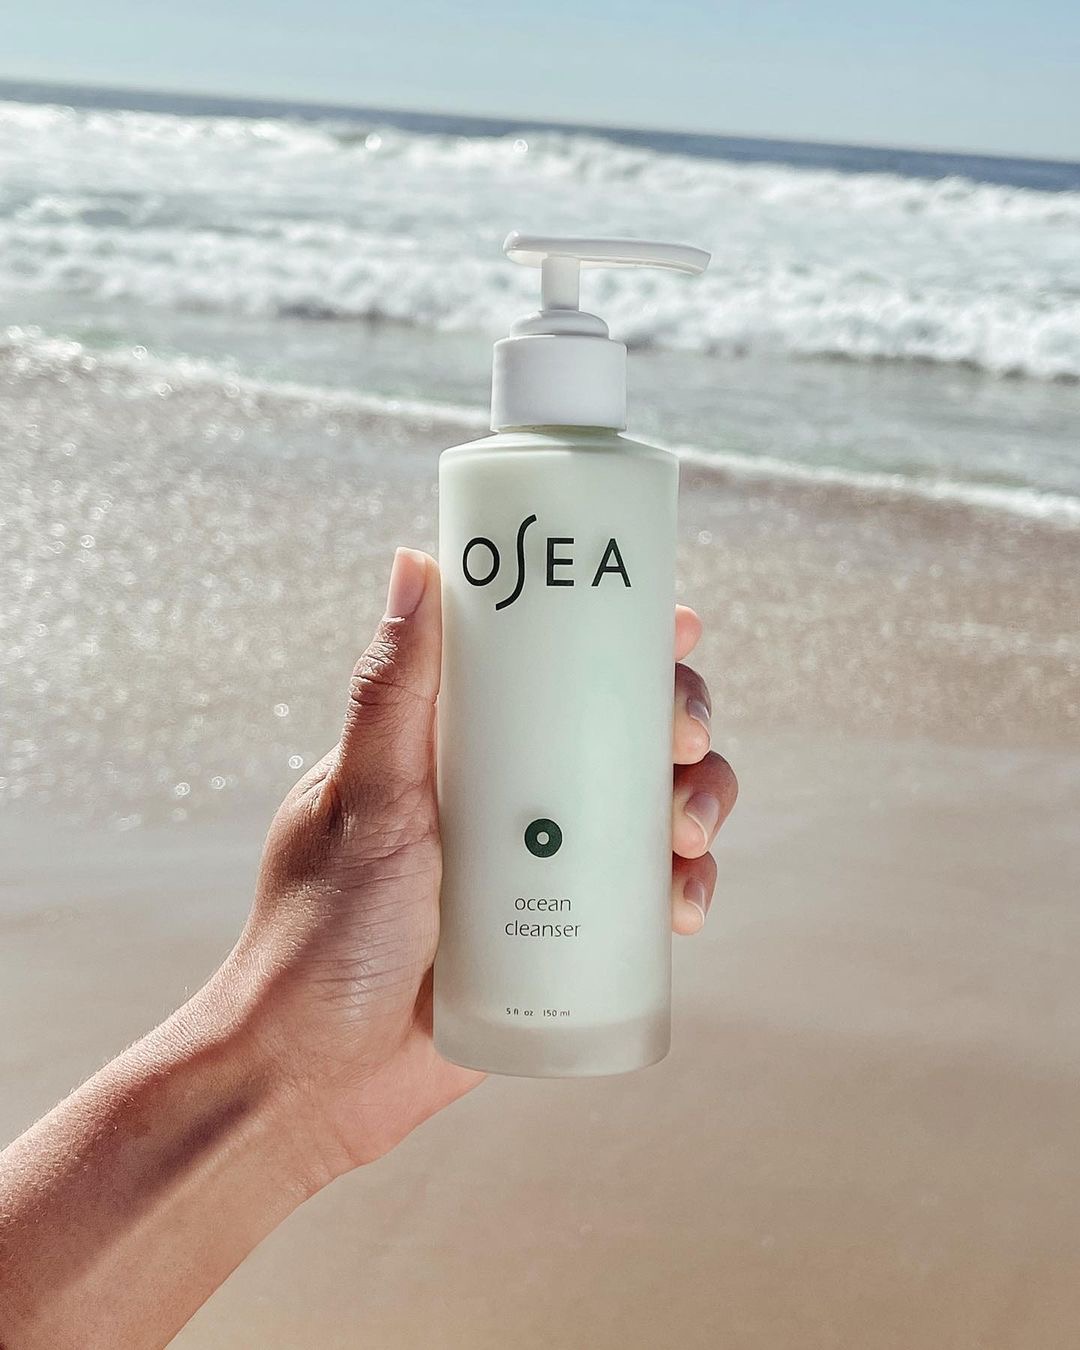 Person holding Osea product by the beach